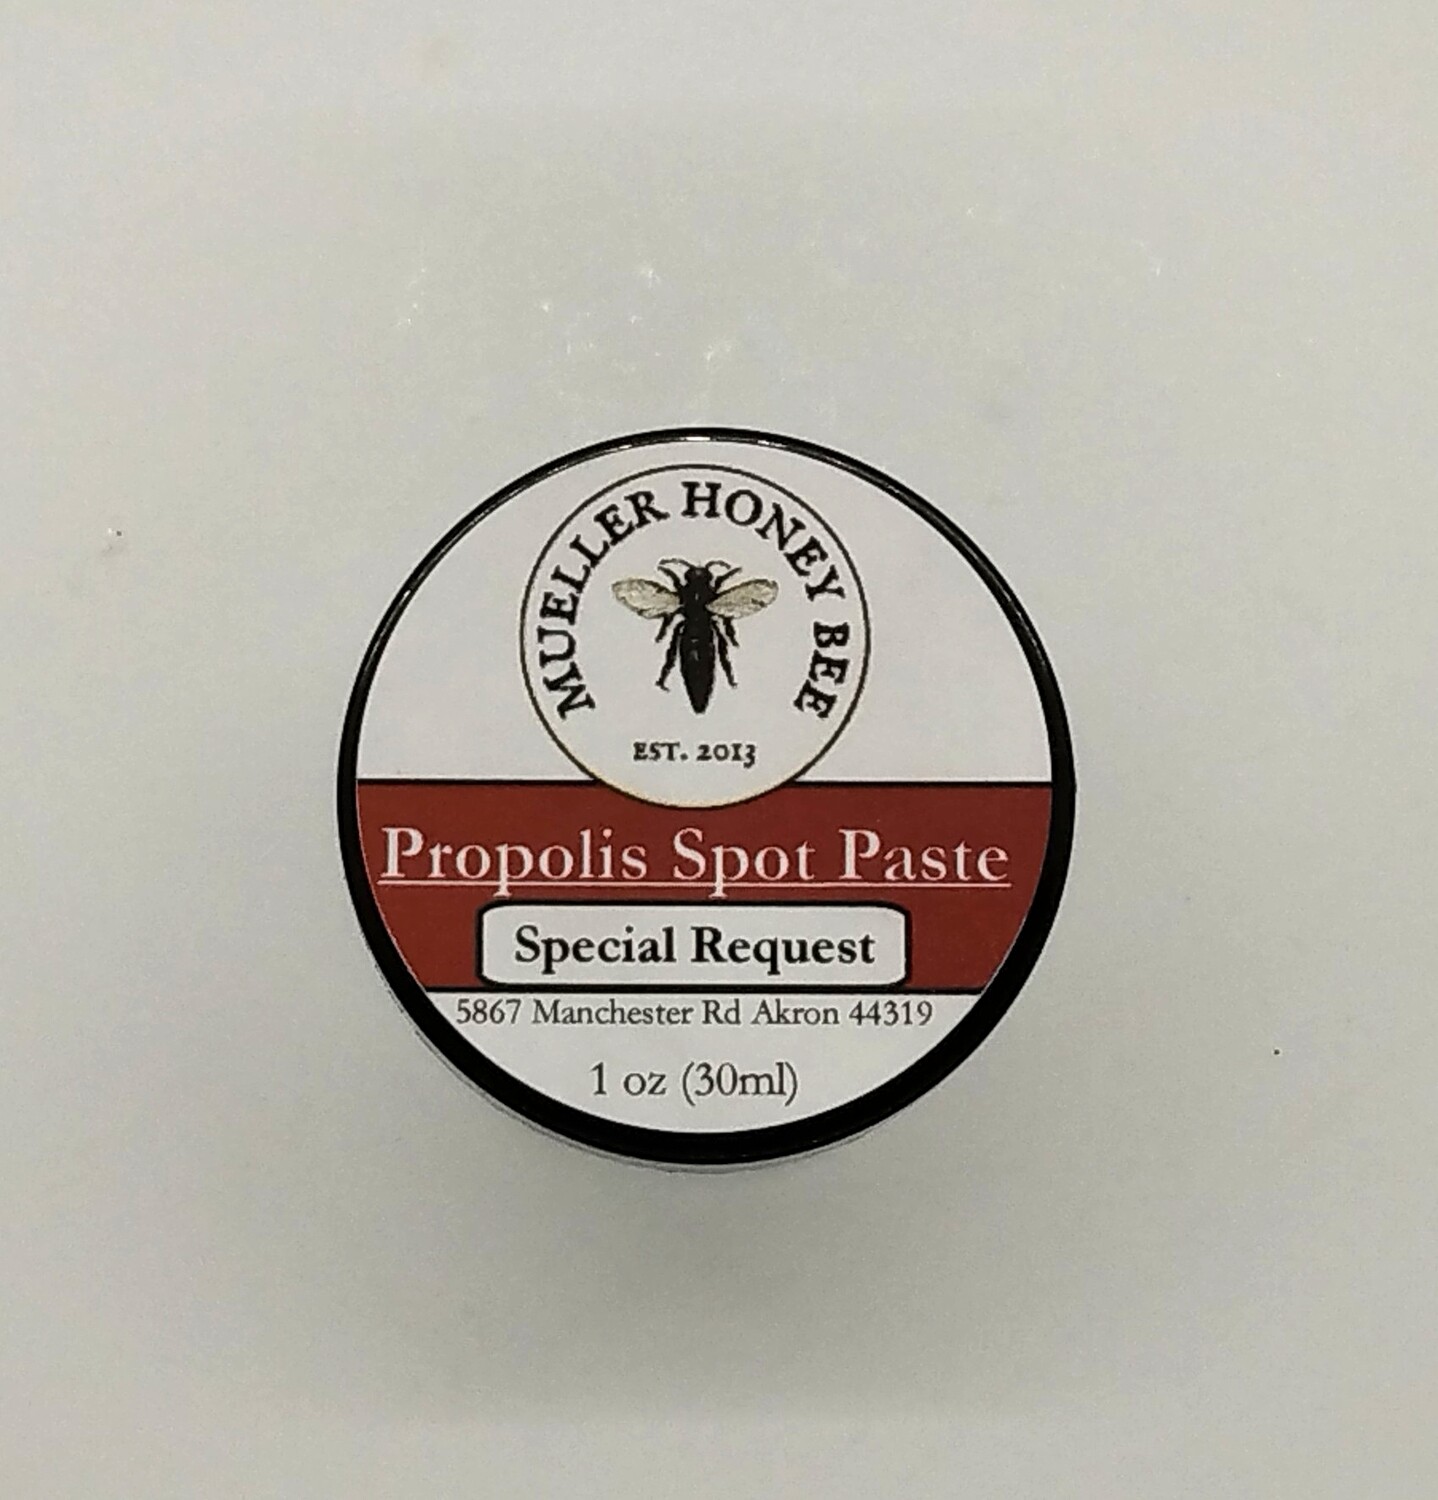 Altered Ingredient Propolis Spot Paste Request (do not purchase without prior confirmation)